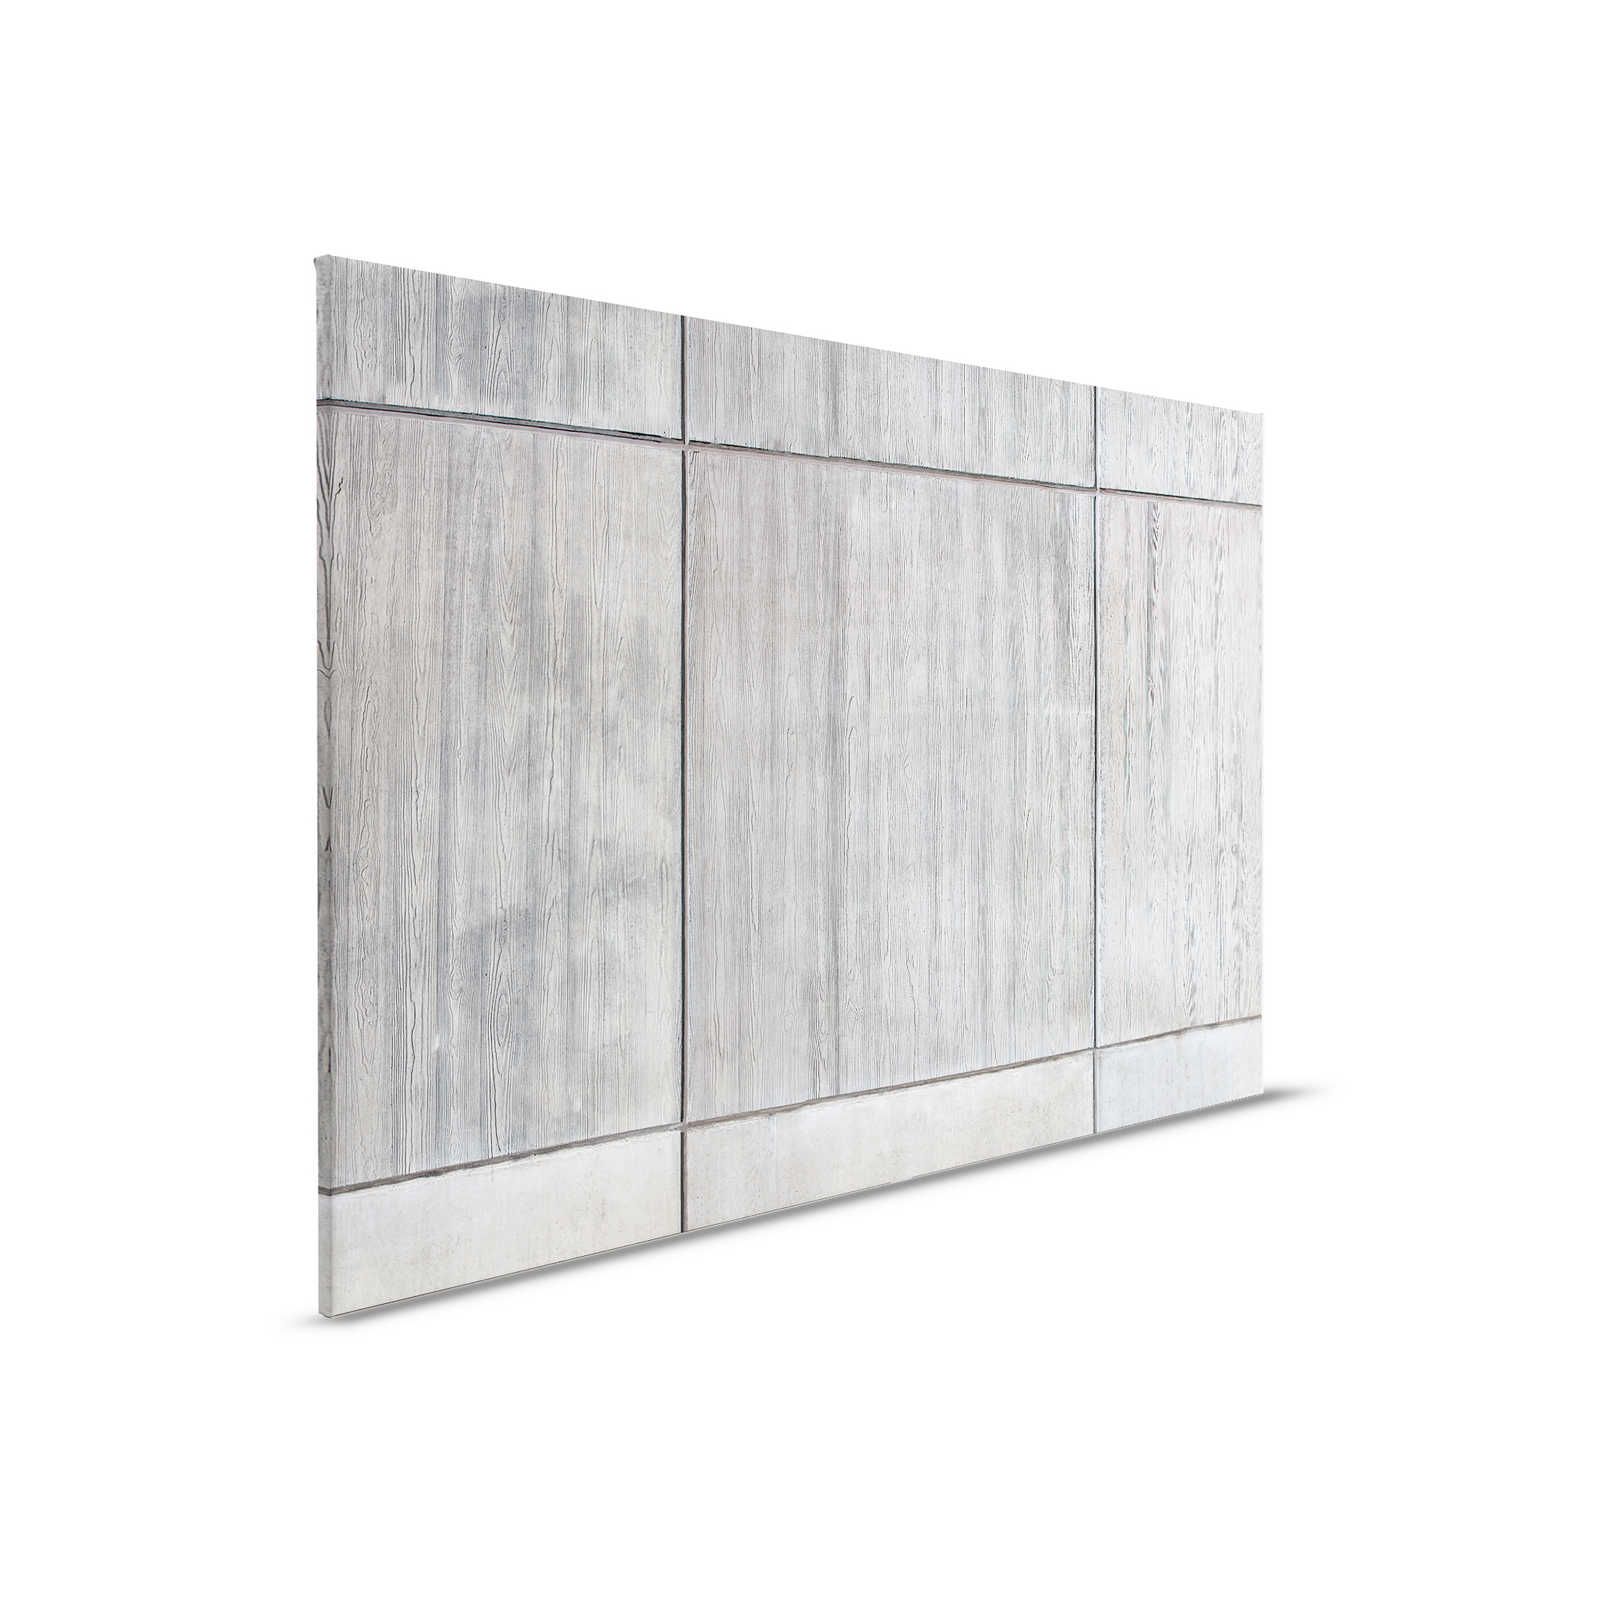         Concrete slab canvas picture with board formwork and wood grain - 0.90 m x 0.60 m
    